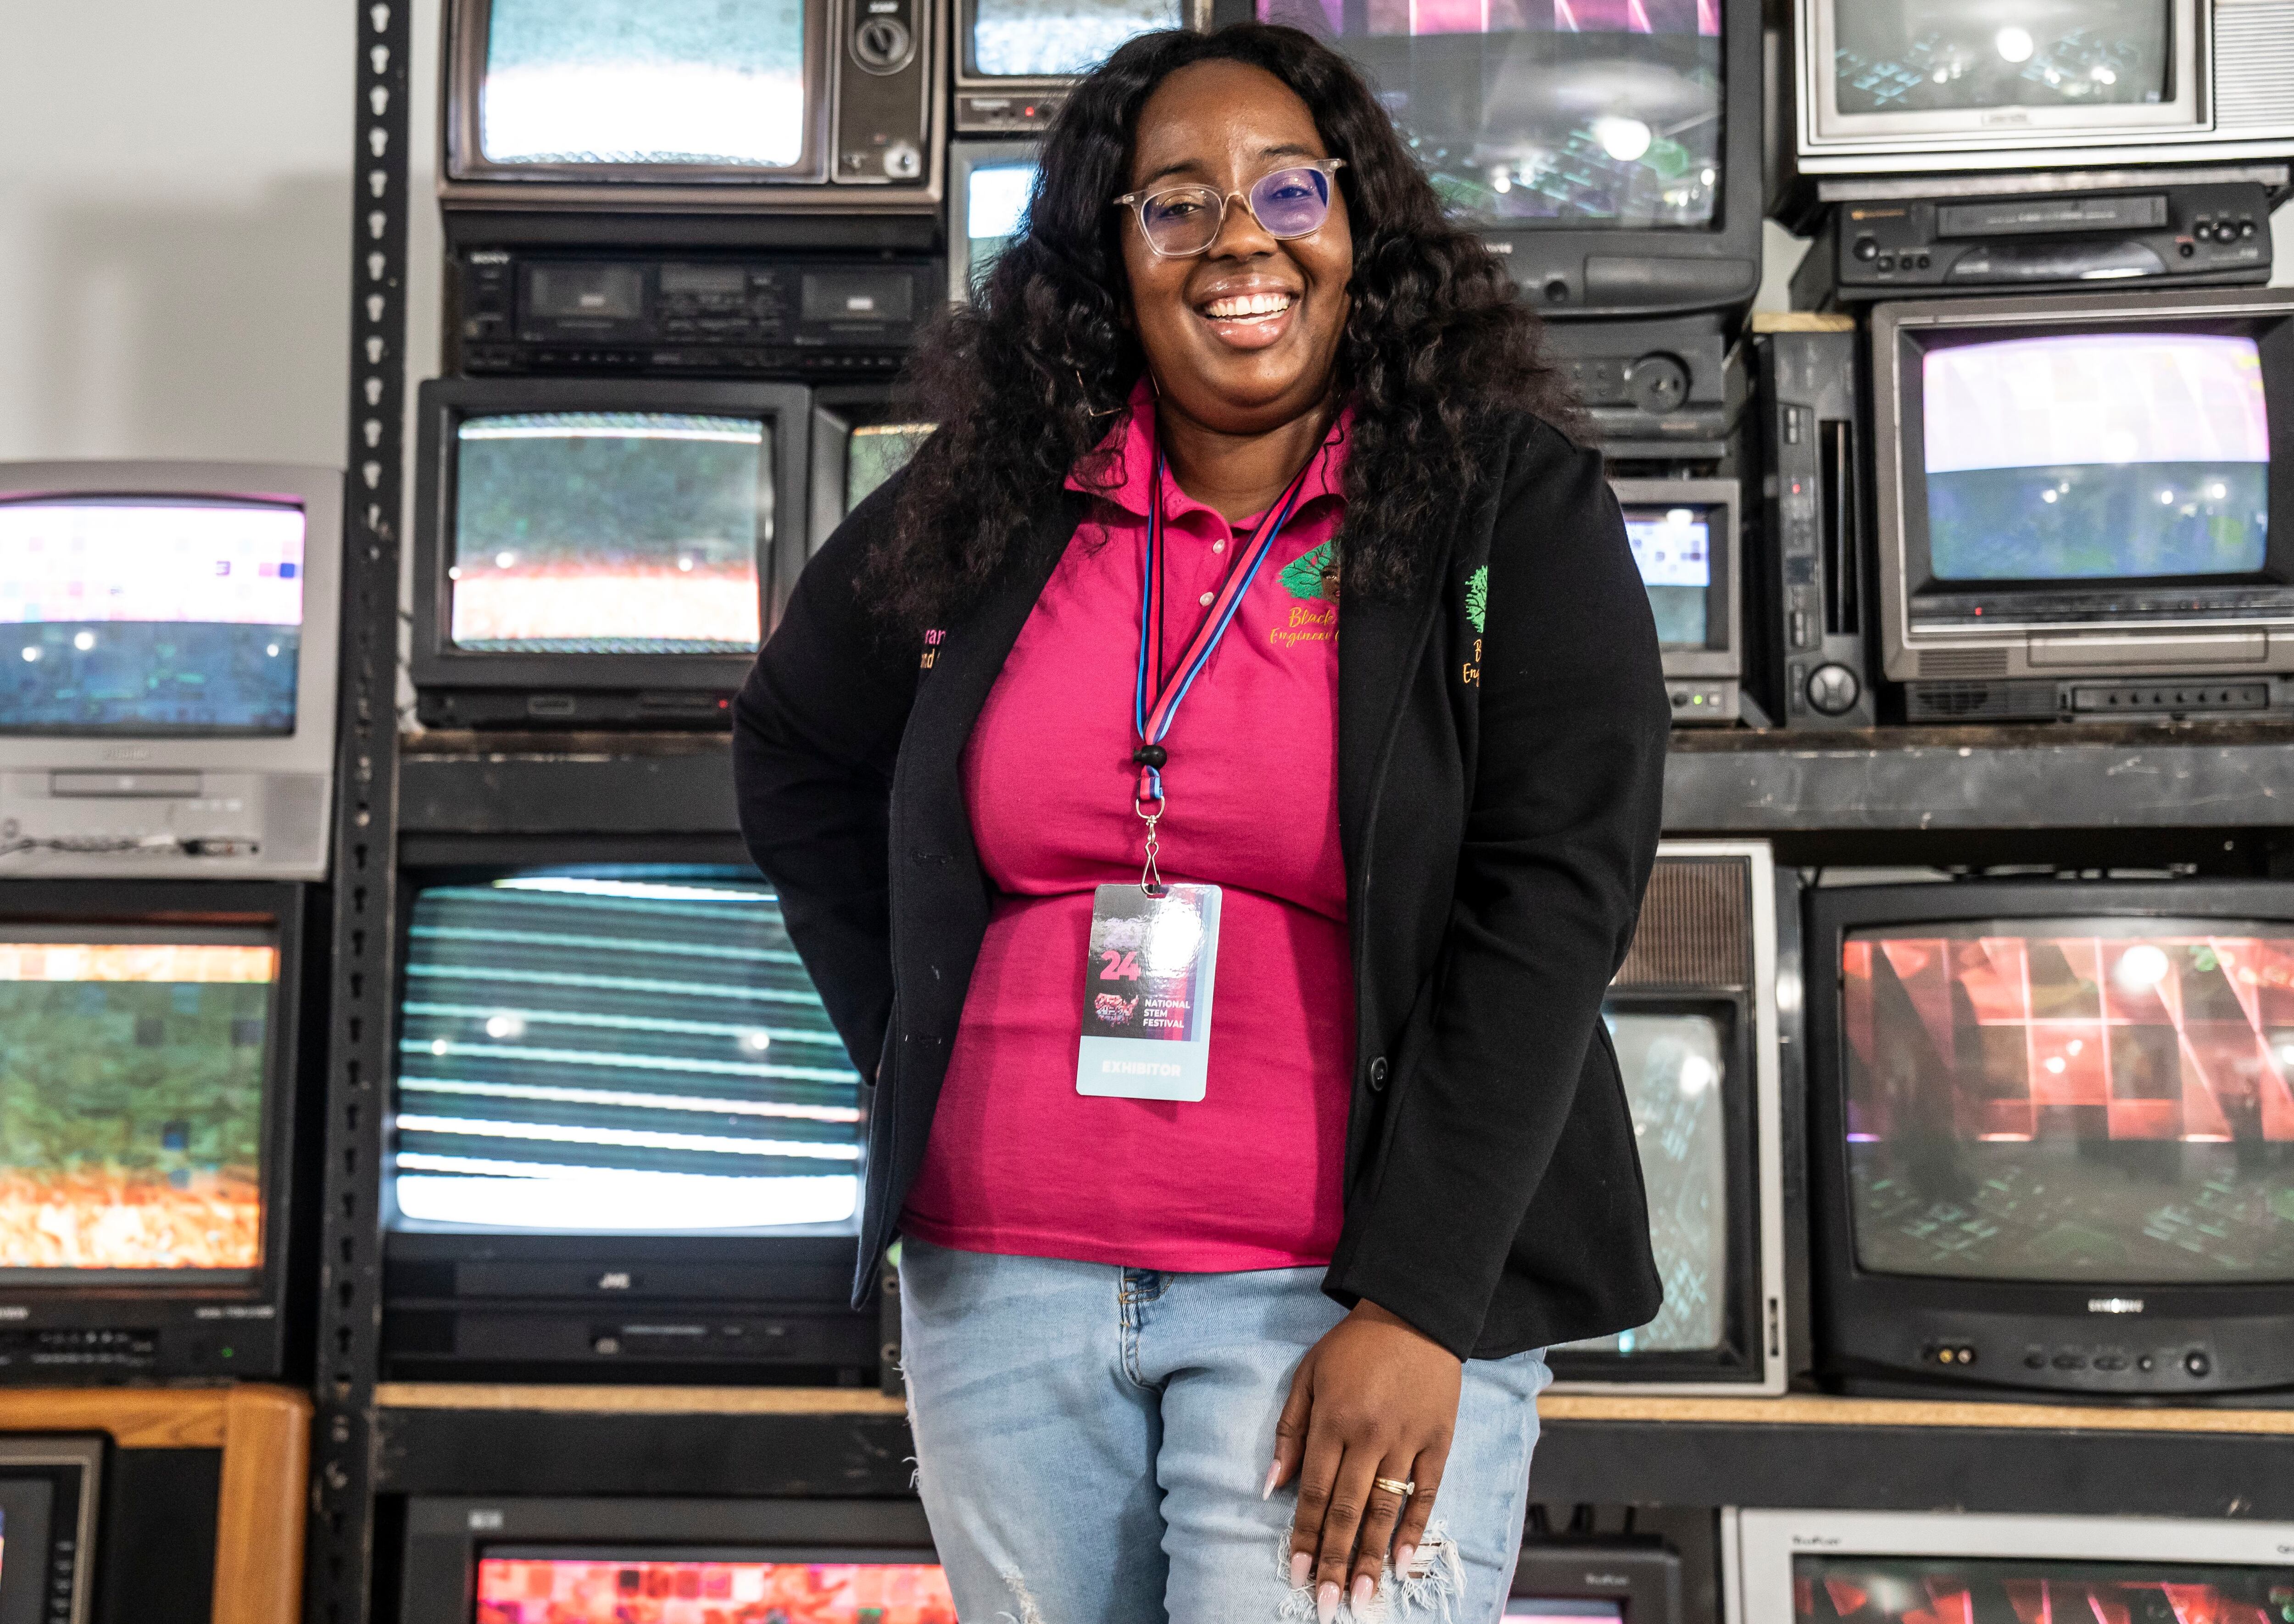 Kara Branch, a chemical engineer by training, is the founder and CEO of Black Girls Do Engineer, an organization that empowers and inspires Black girls to go into STEM fields.